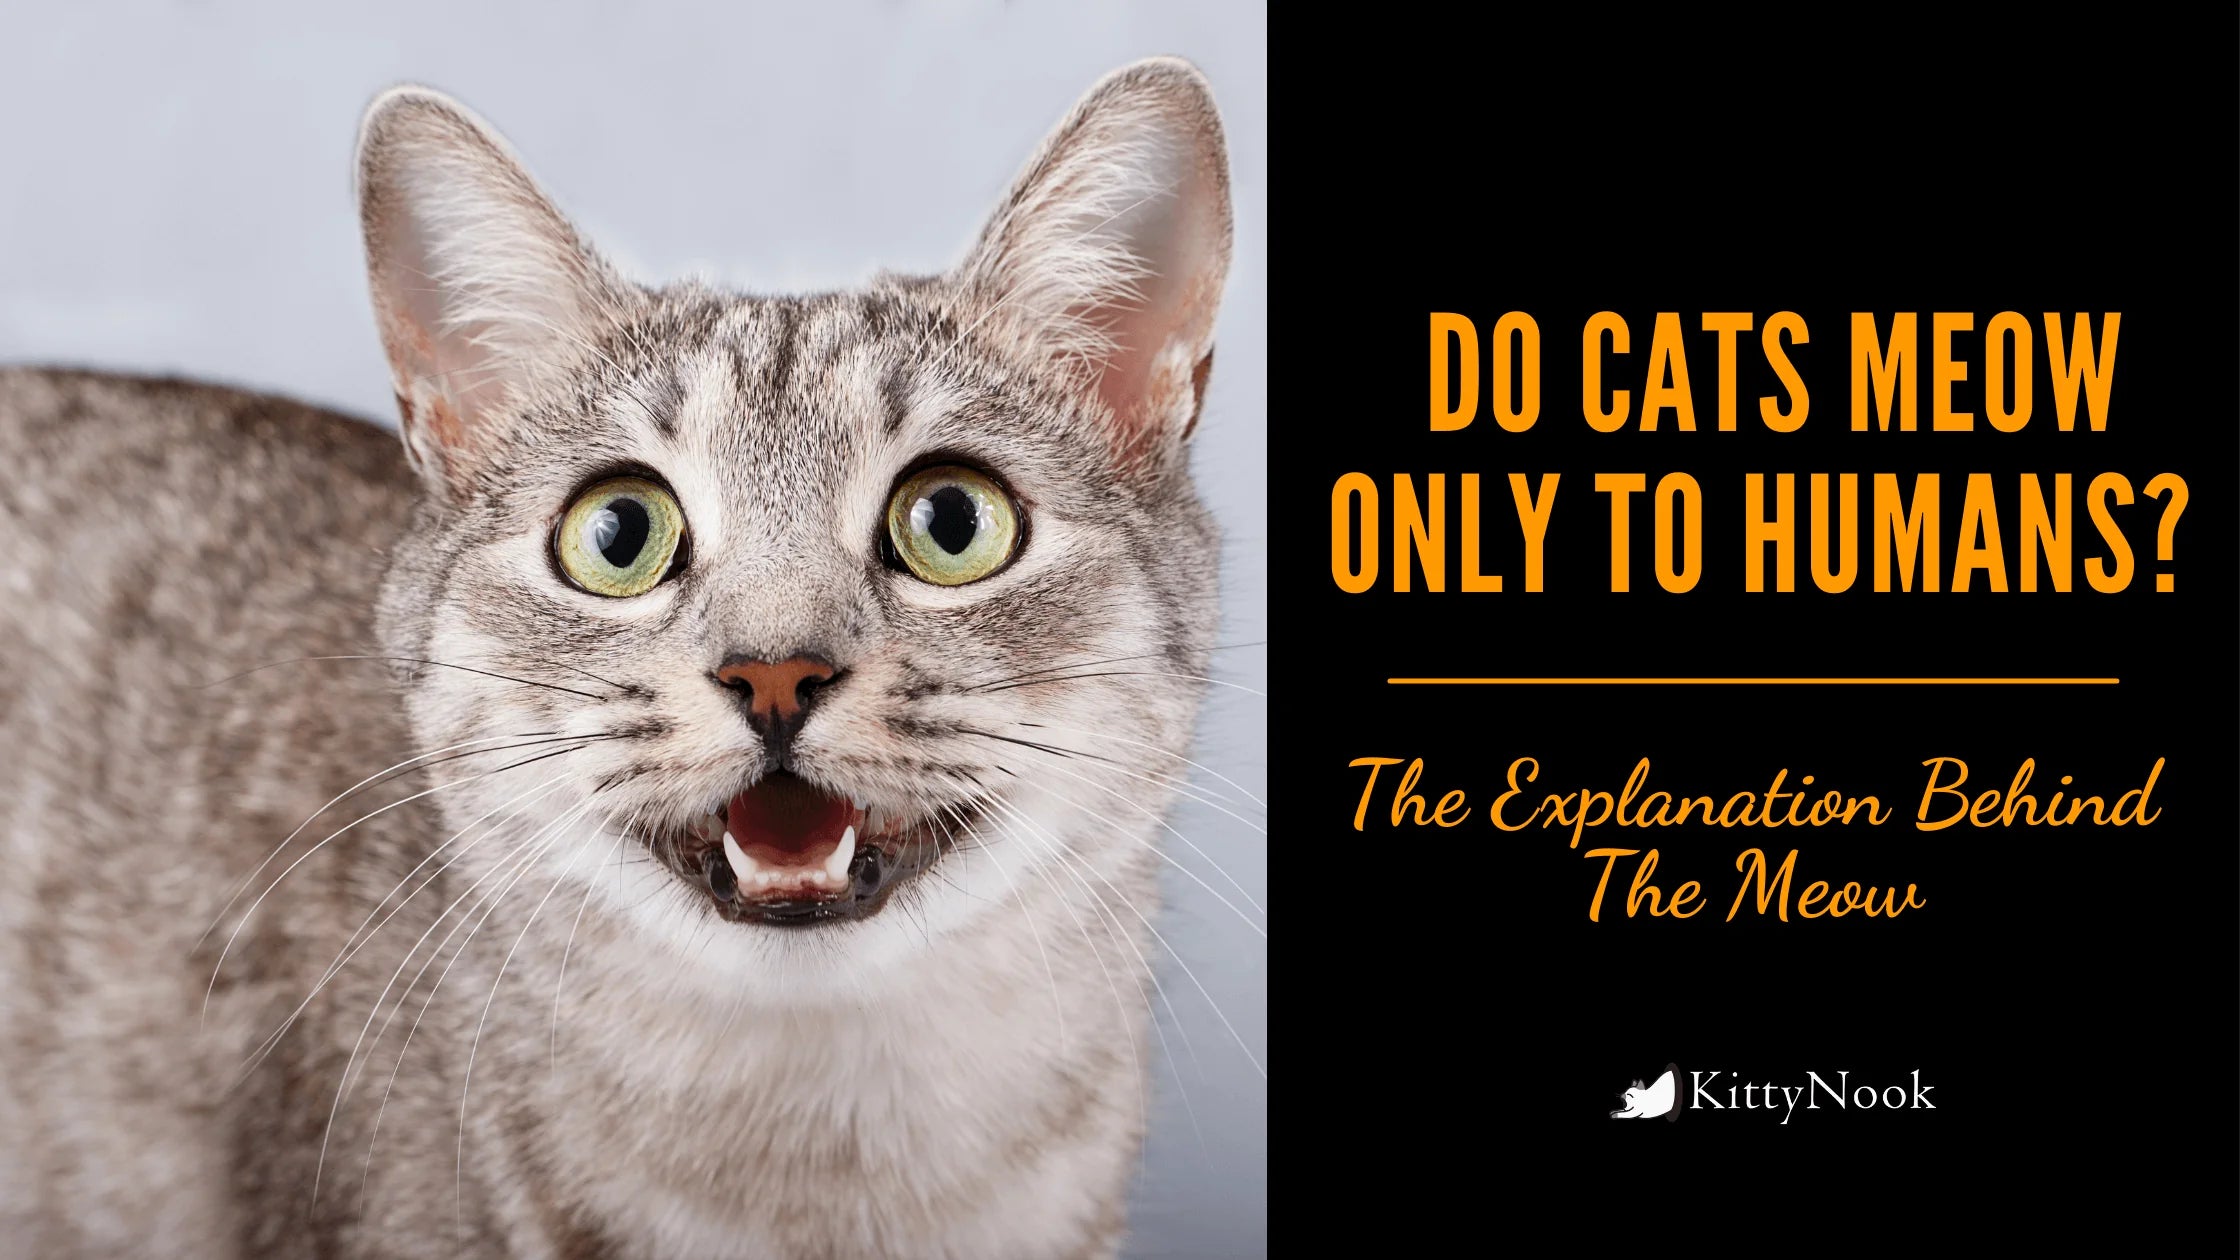 Do Cats Meow Only To Humans? The Explanation Behind The Meow - KittyNook Cat Company